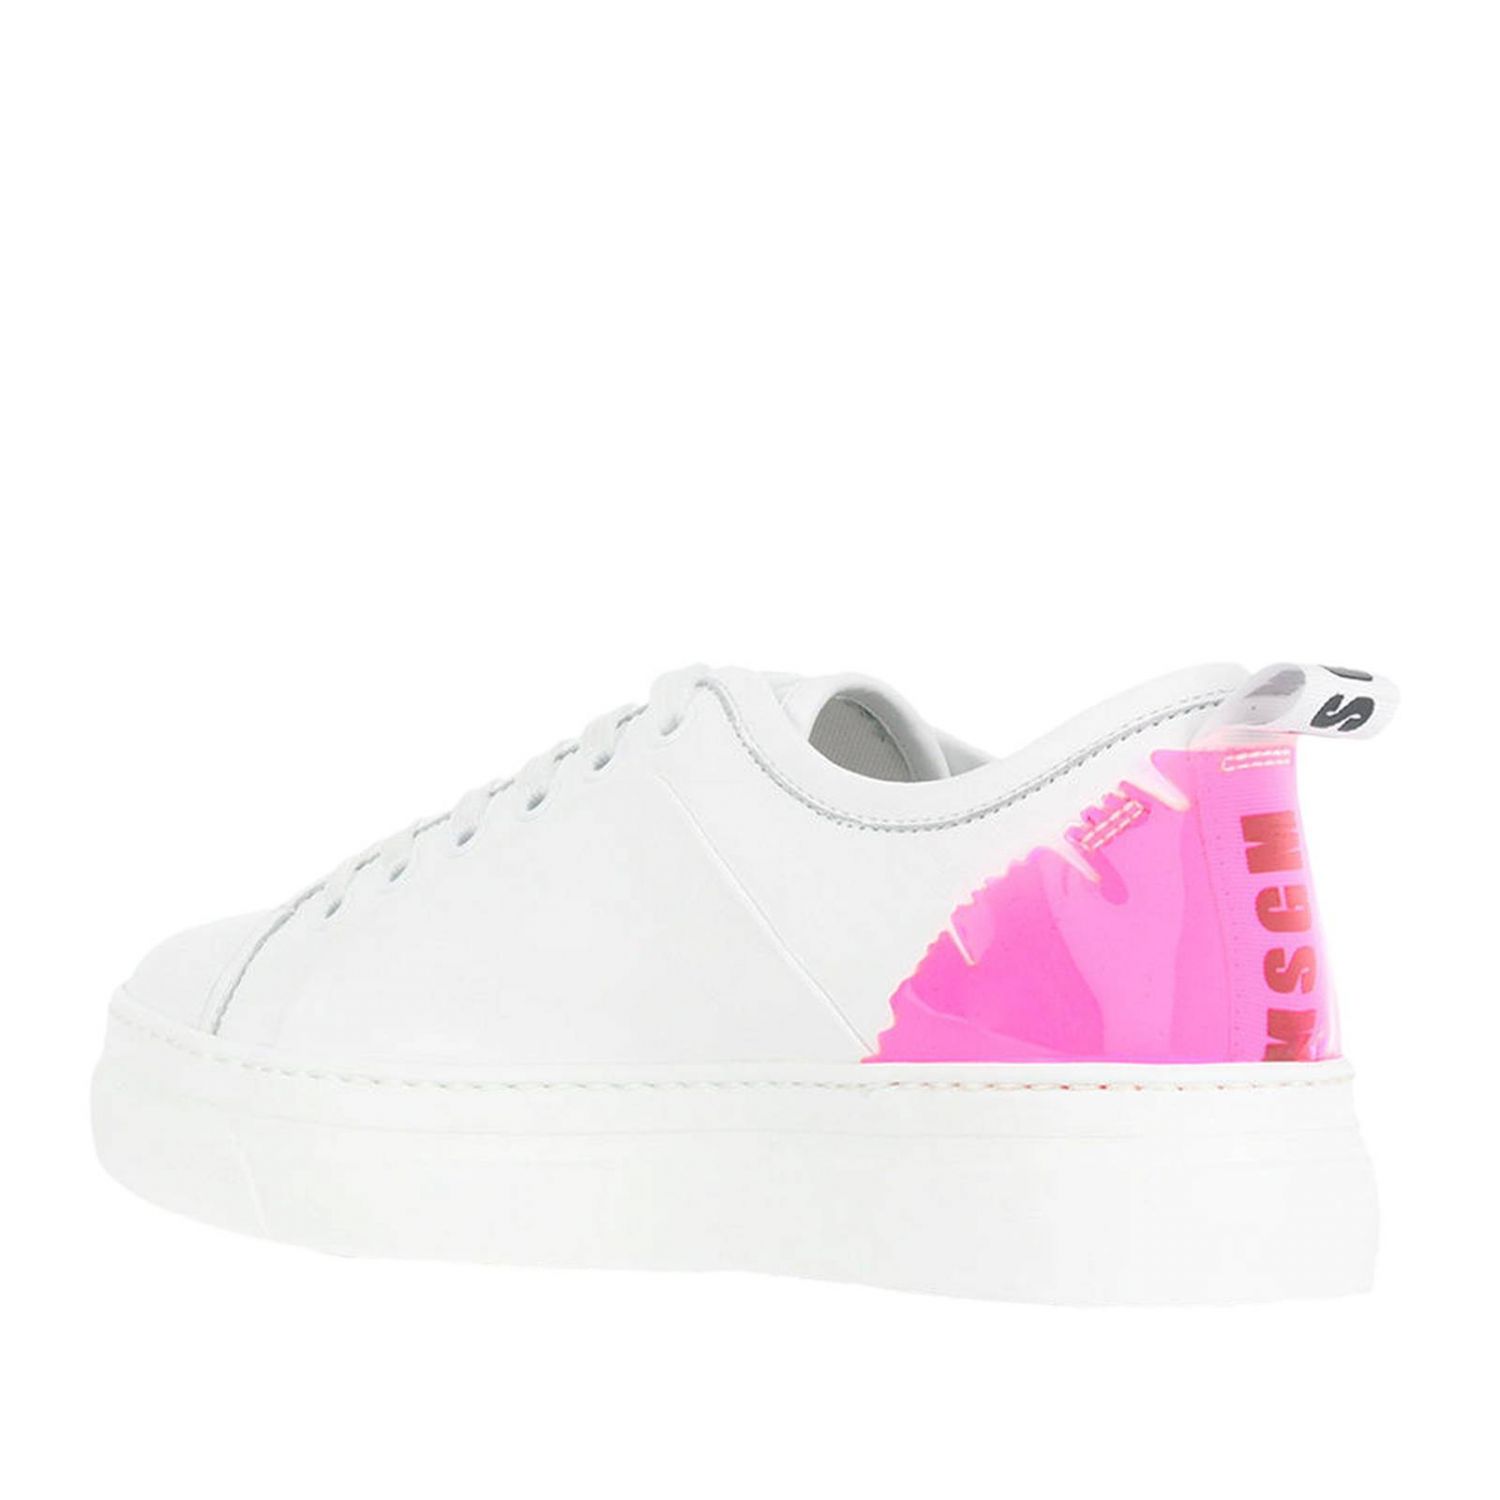 Msgm Outlet: Sneakers women | Sneakers Msgm Women White | Sneakers Msgm ...